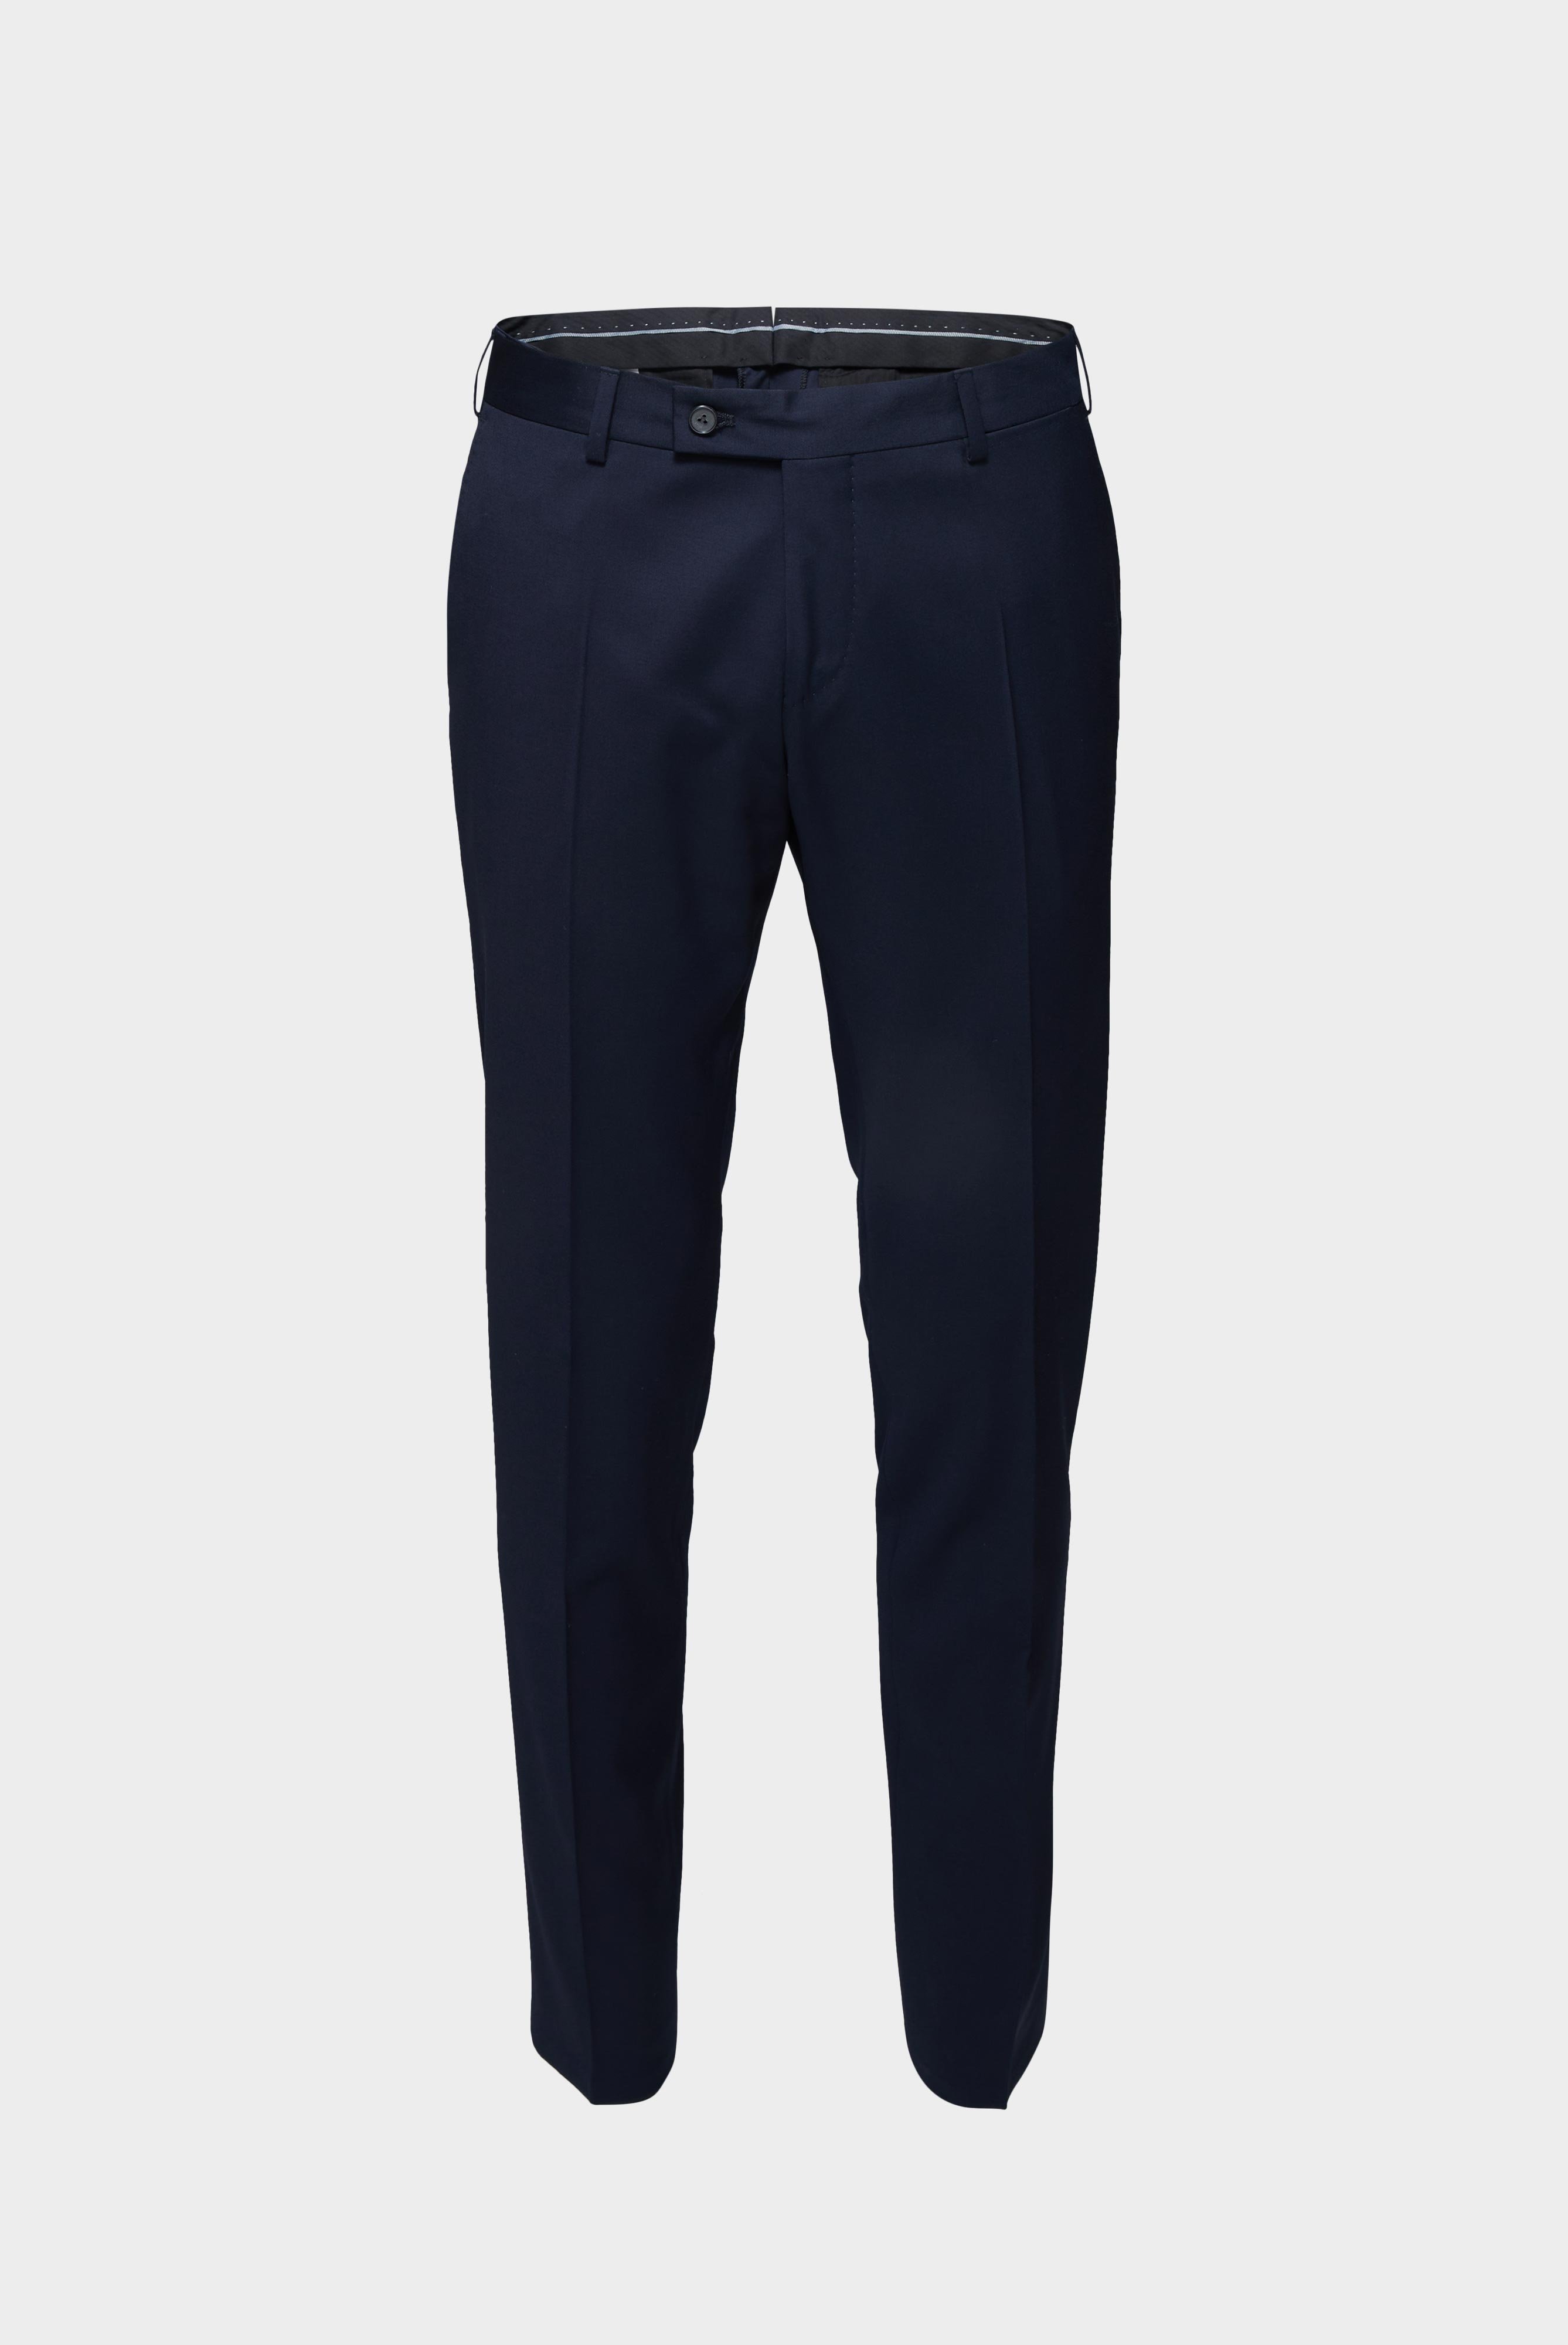 Jeans & Trousers+Wool Trousers Slim Fit+20.7880.16.H01010.780.23